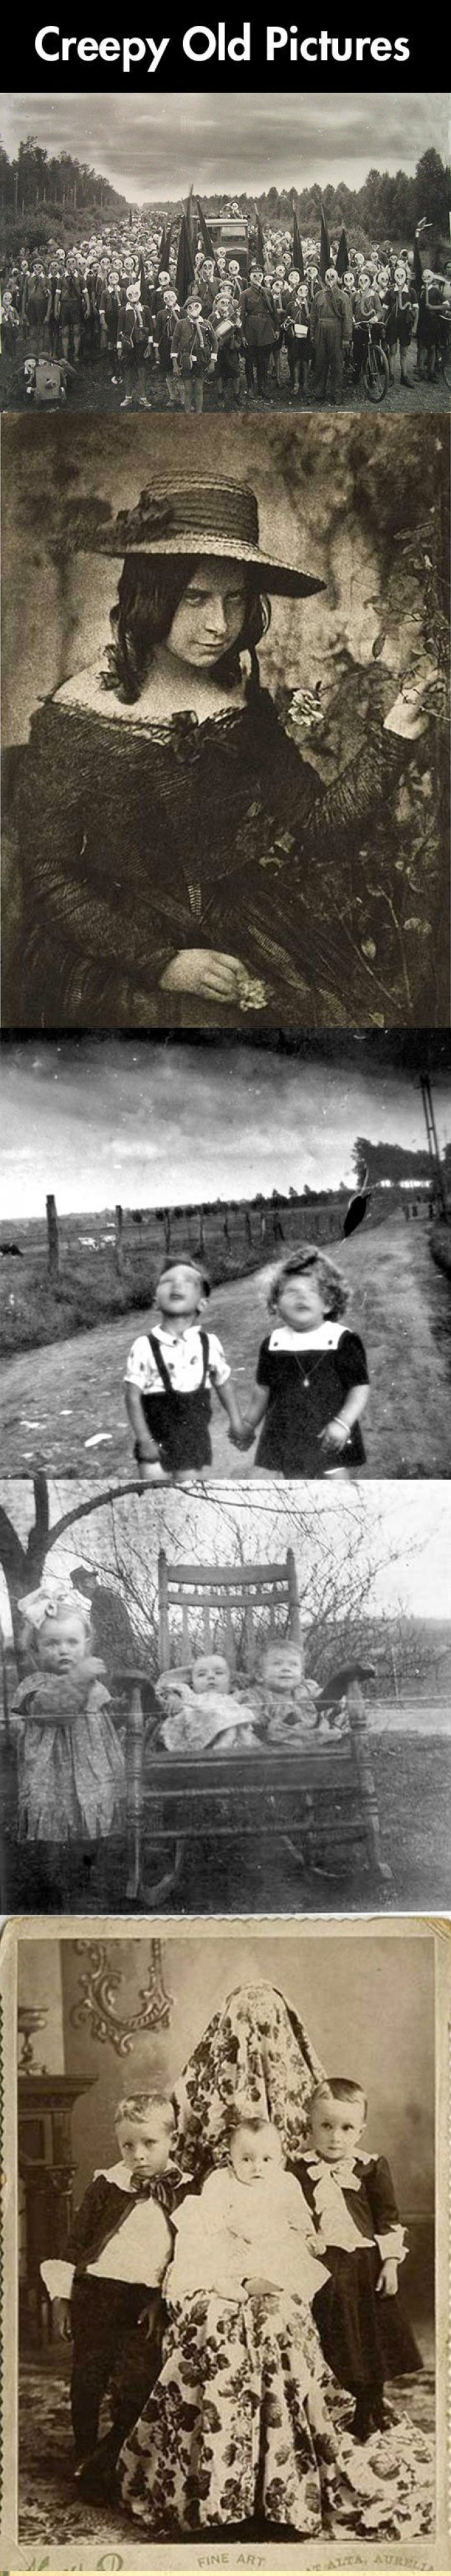 5 Old Photos That Will Give You Chills